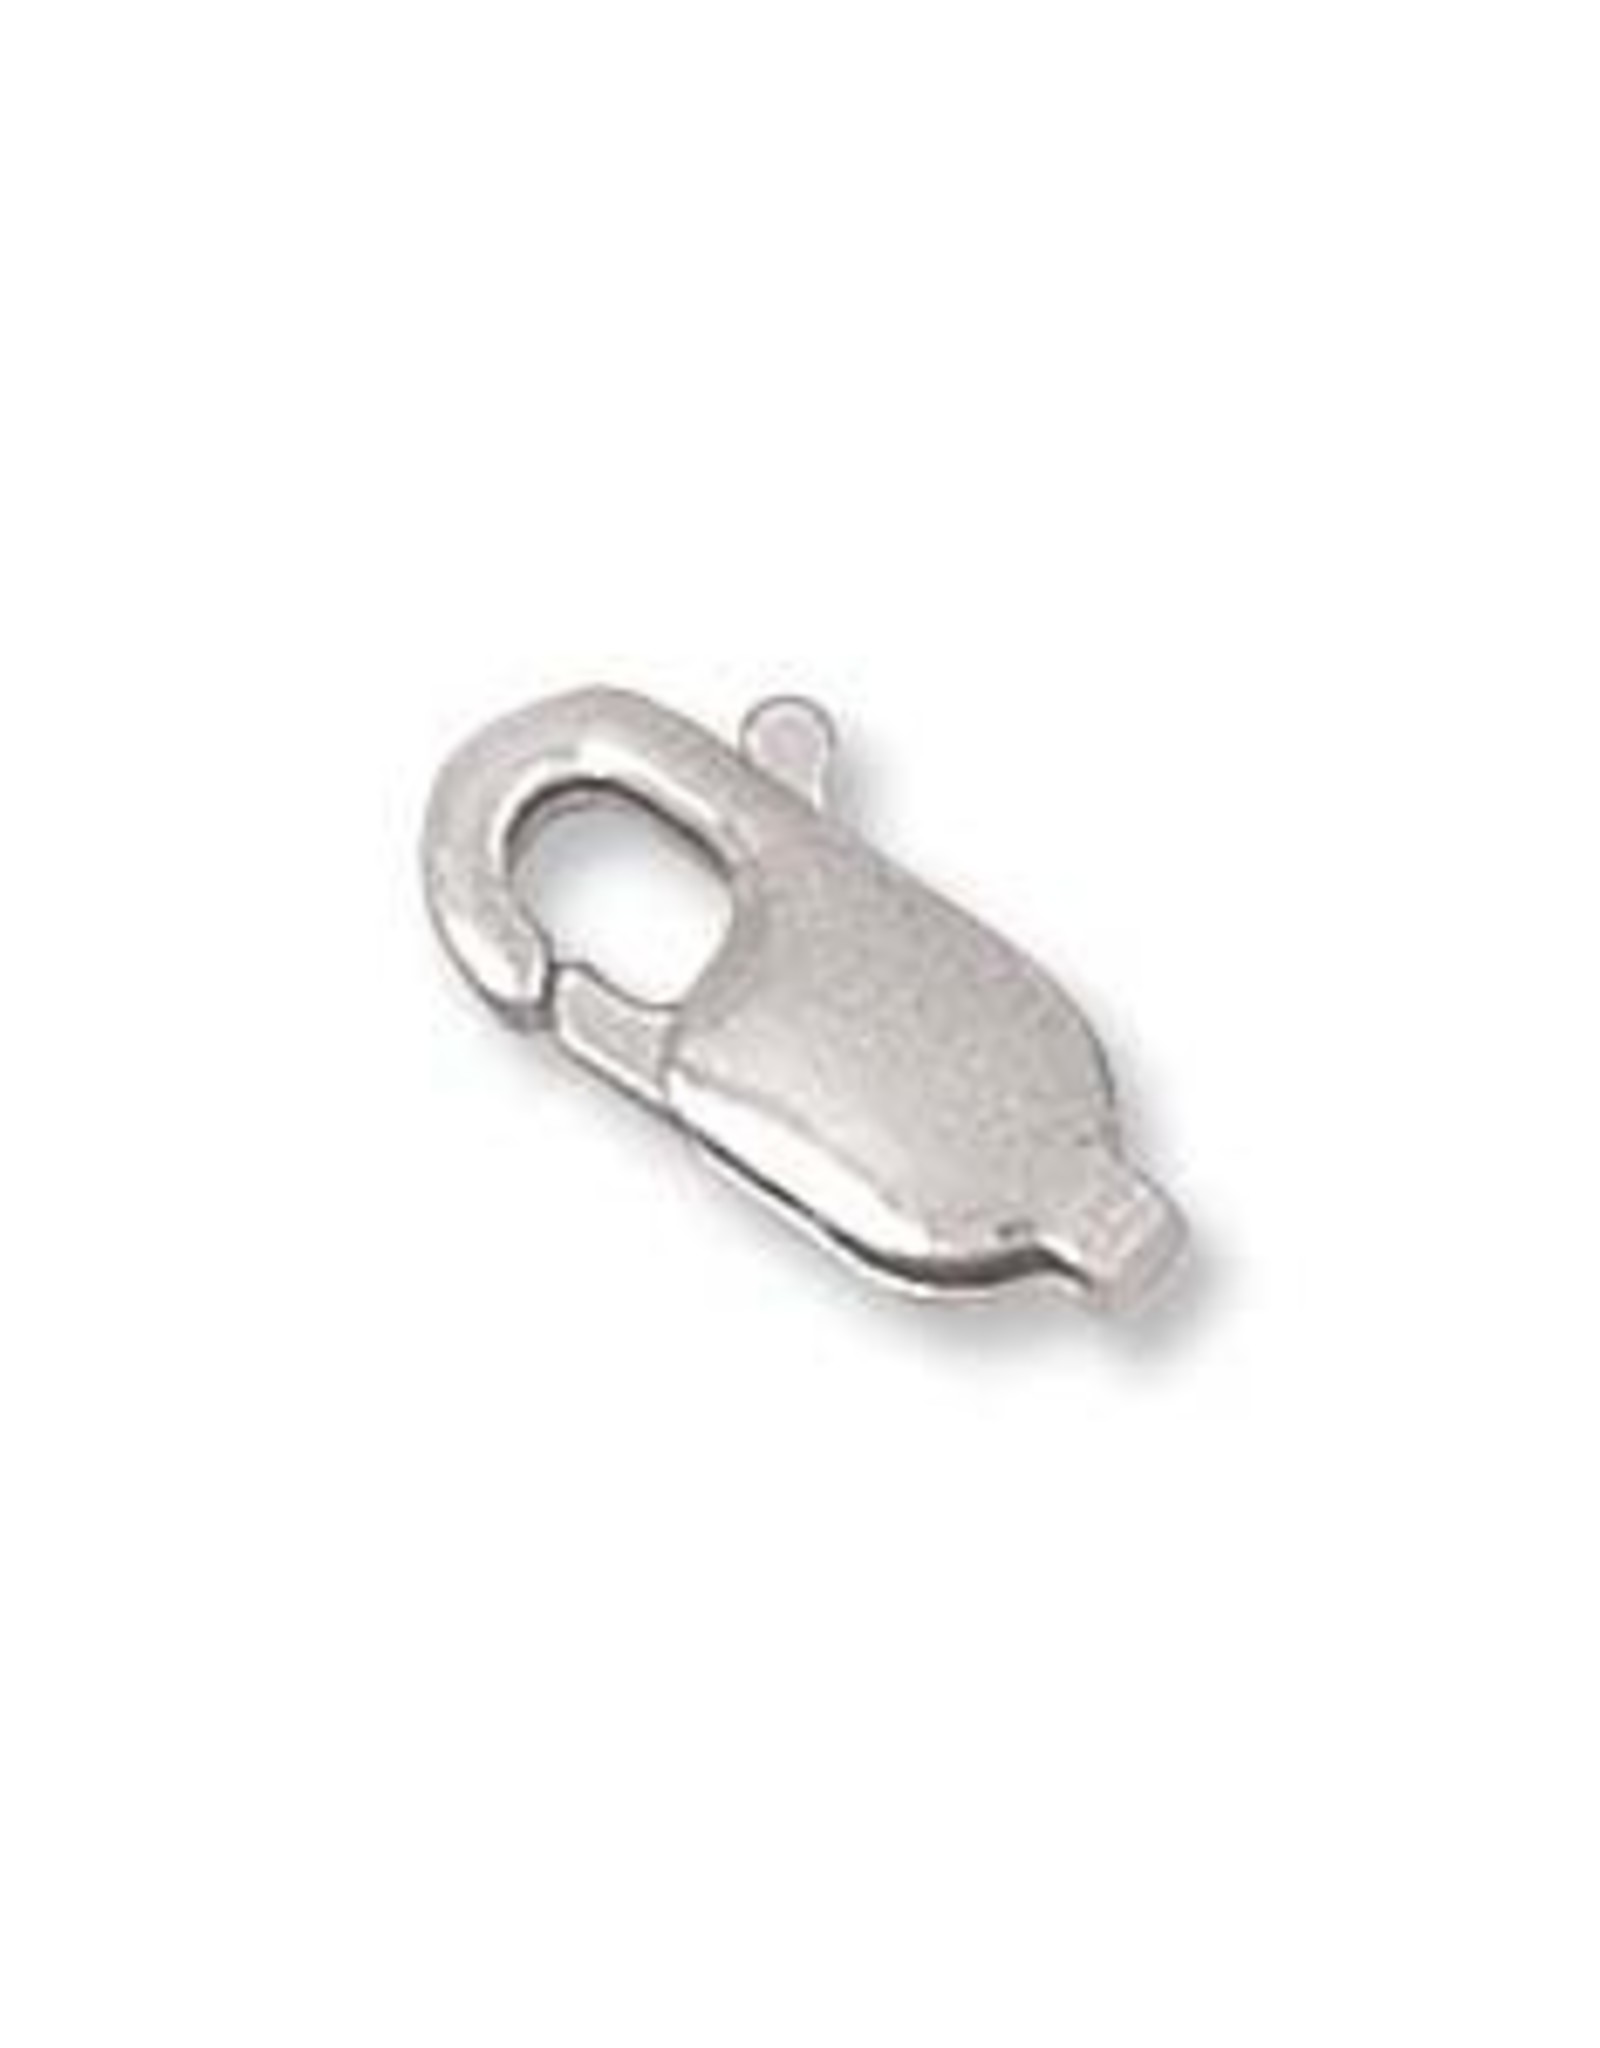 14x5 Lobster Clasp, Sterling Silver Qty 2